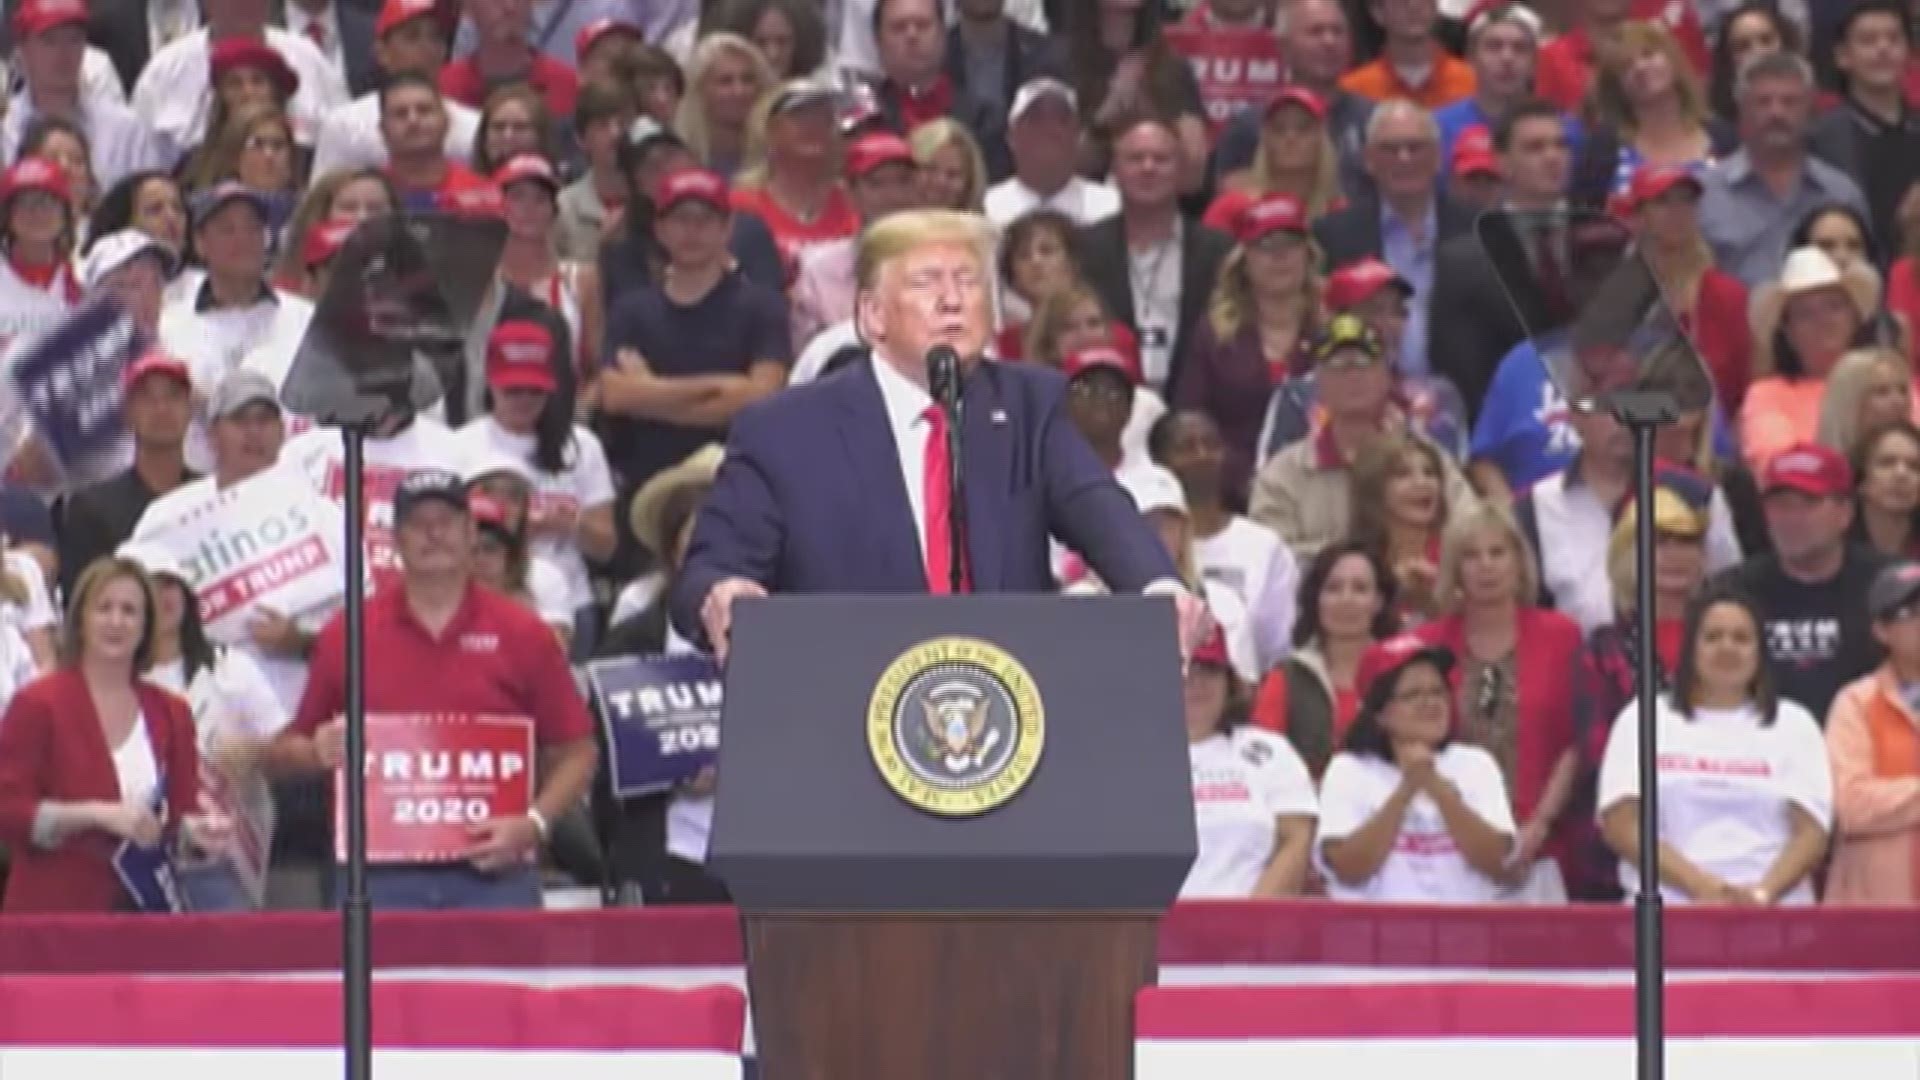 President Trump talked about several Texas topics at his 'Keep America Great' campaign rally in Dallas Thursday.